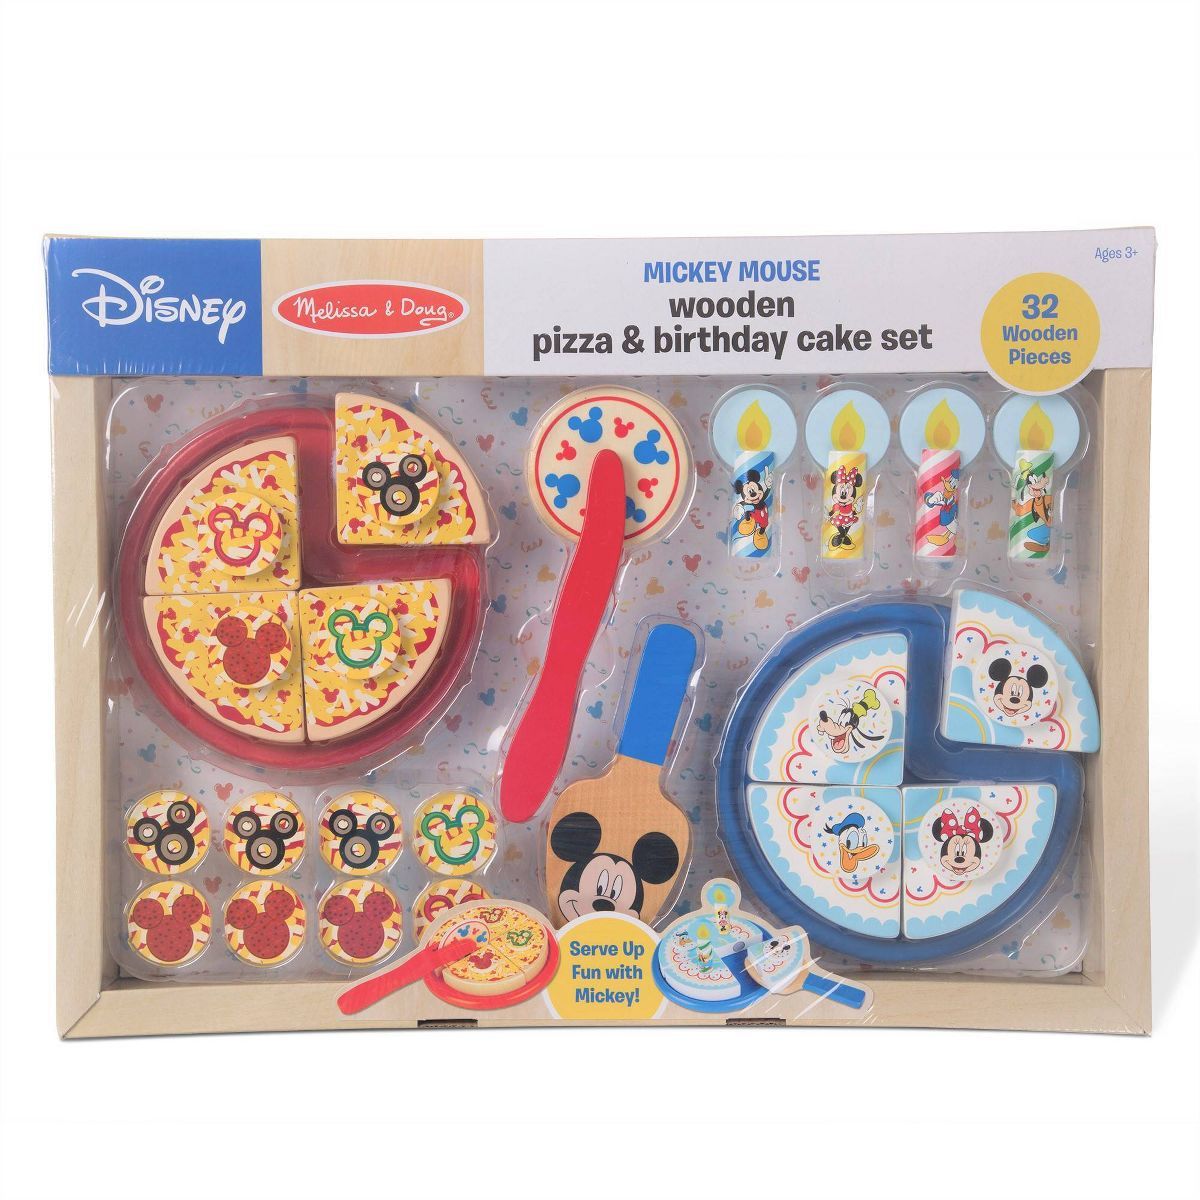 Melissa & Doug Mickey Mouse Wooden Pizza and Birthday Cake Set (32pc) - Play Food | Target